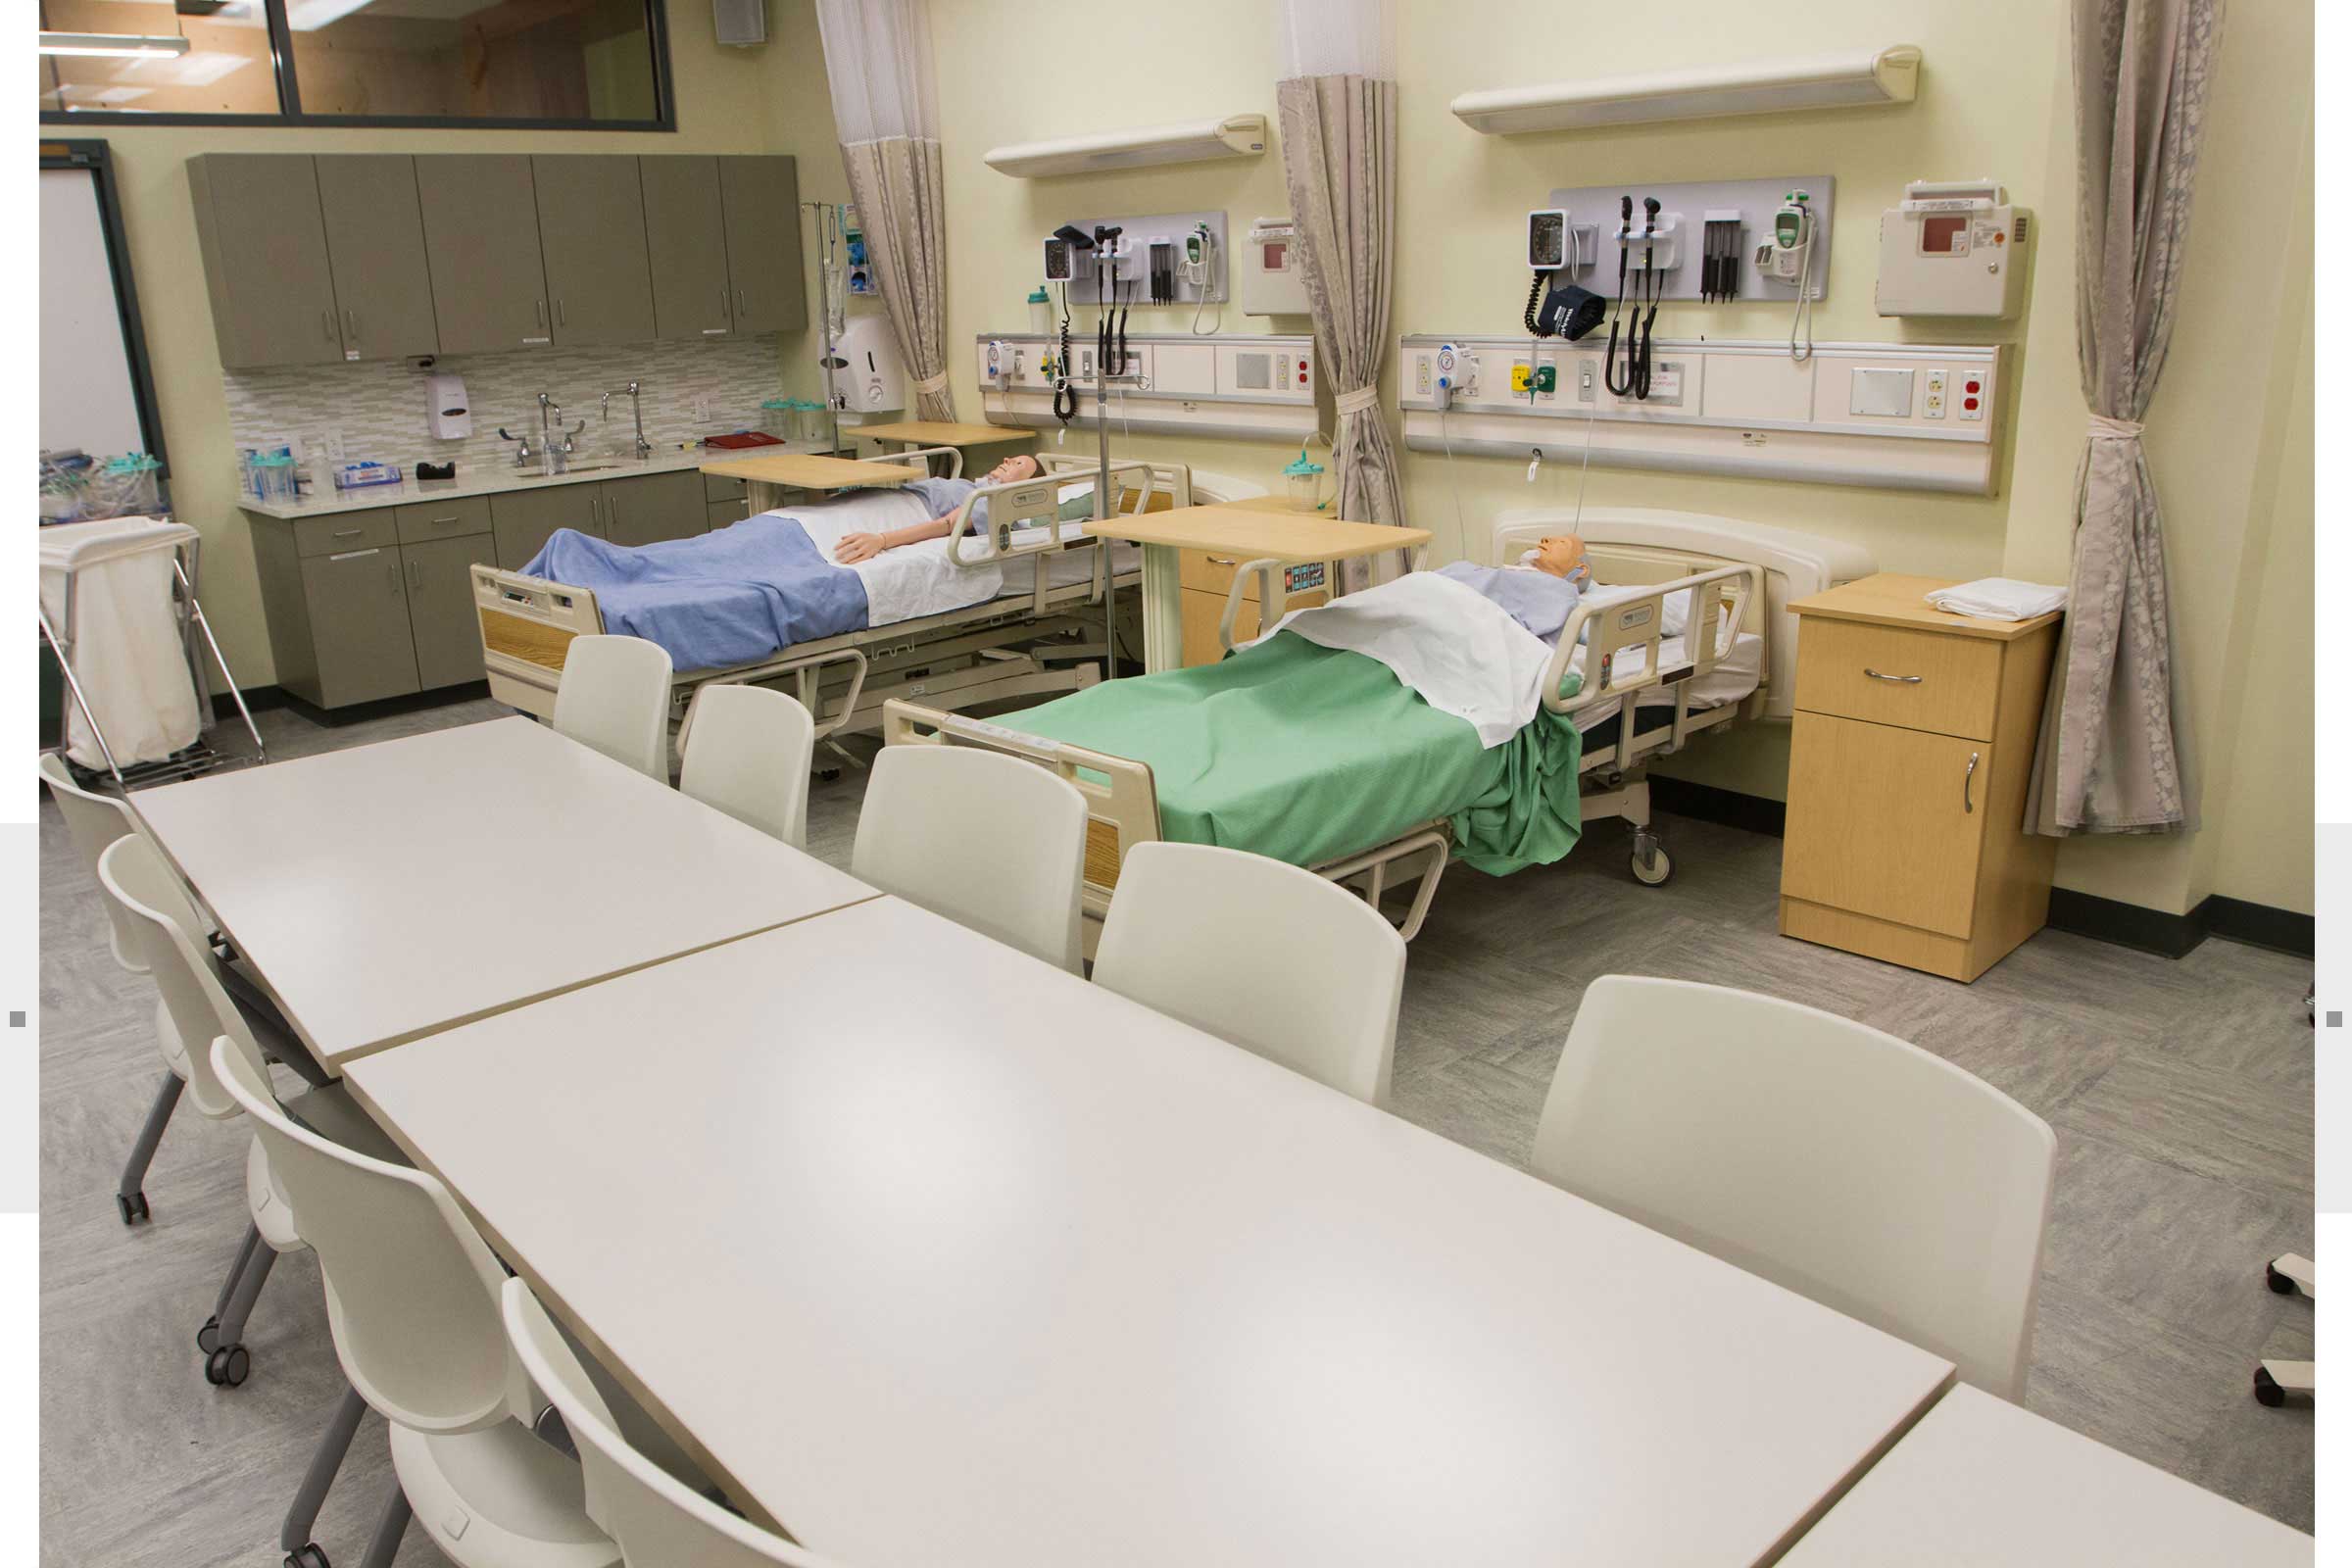 CSU patient care area with conference space